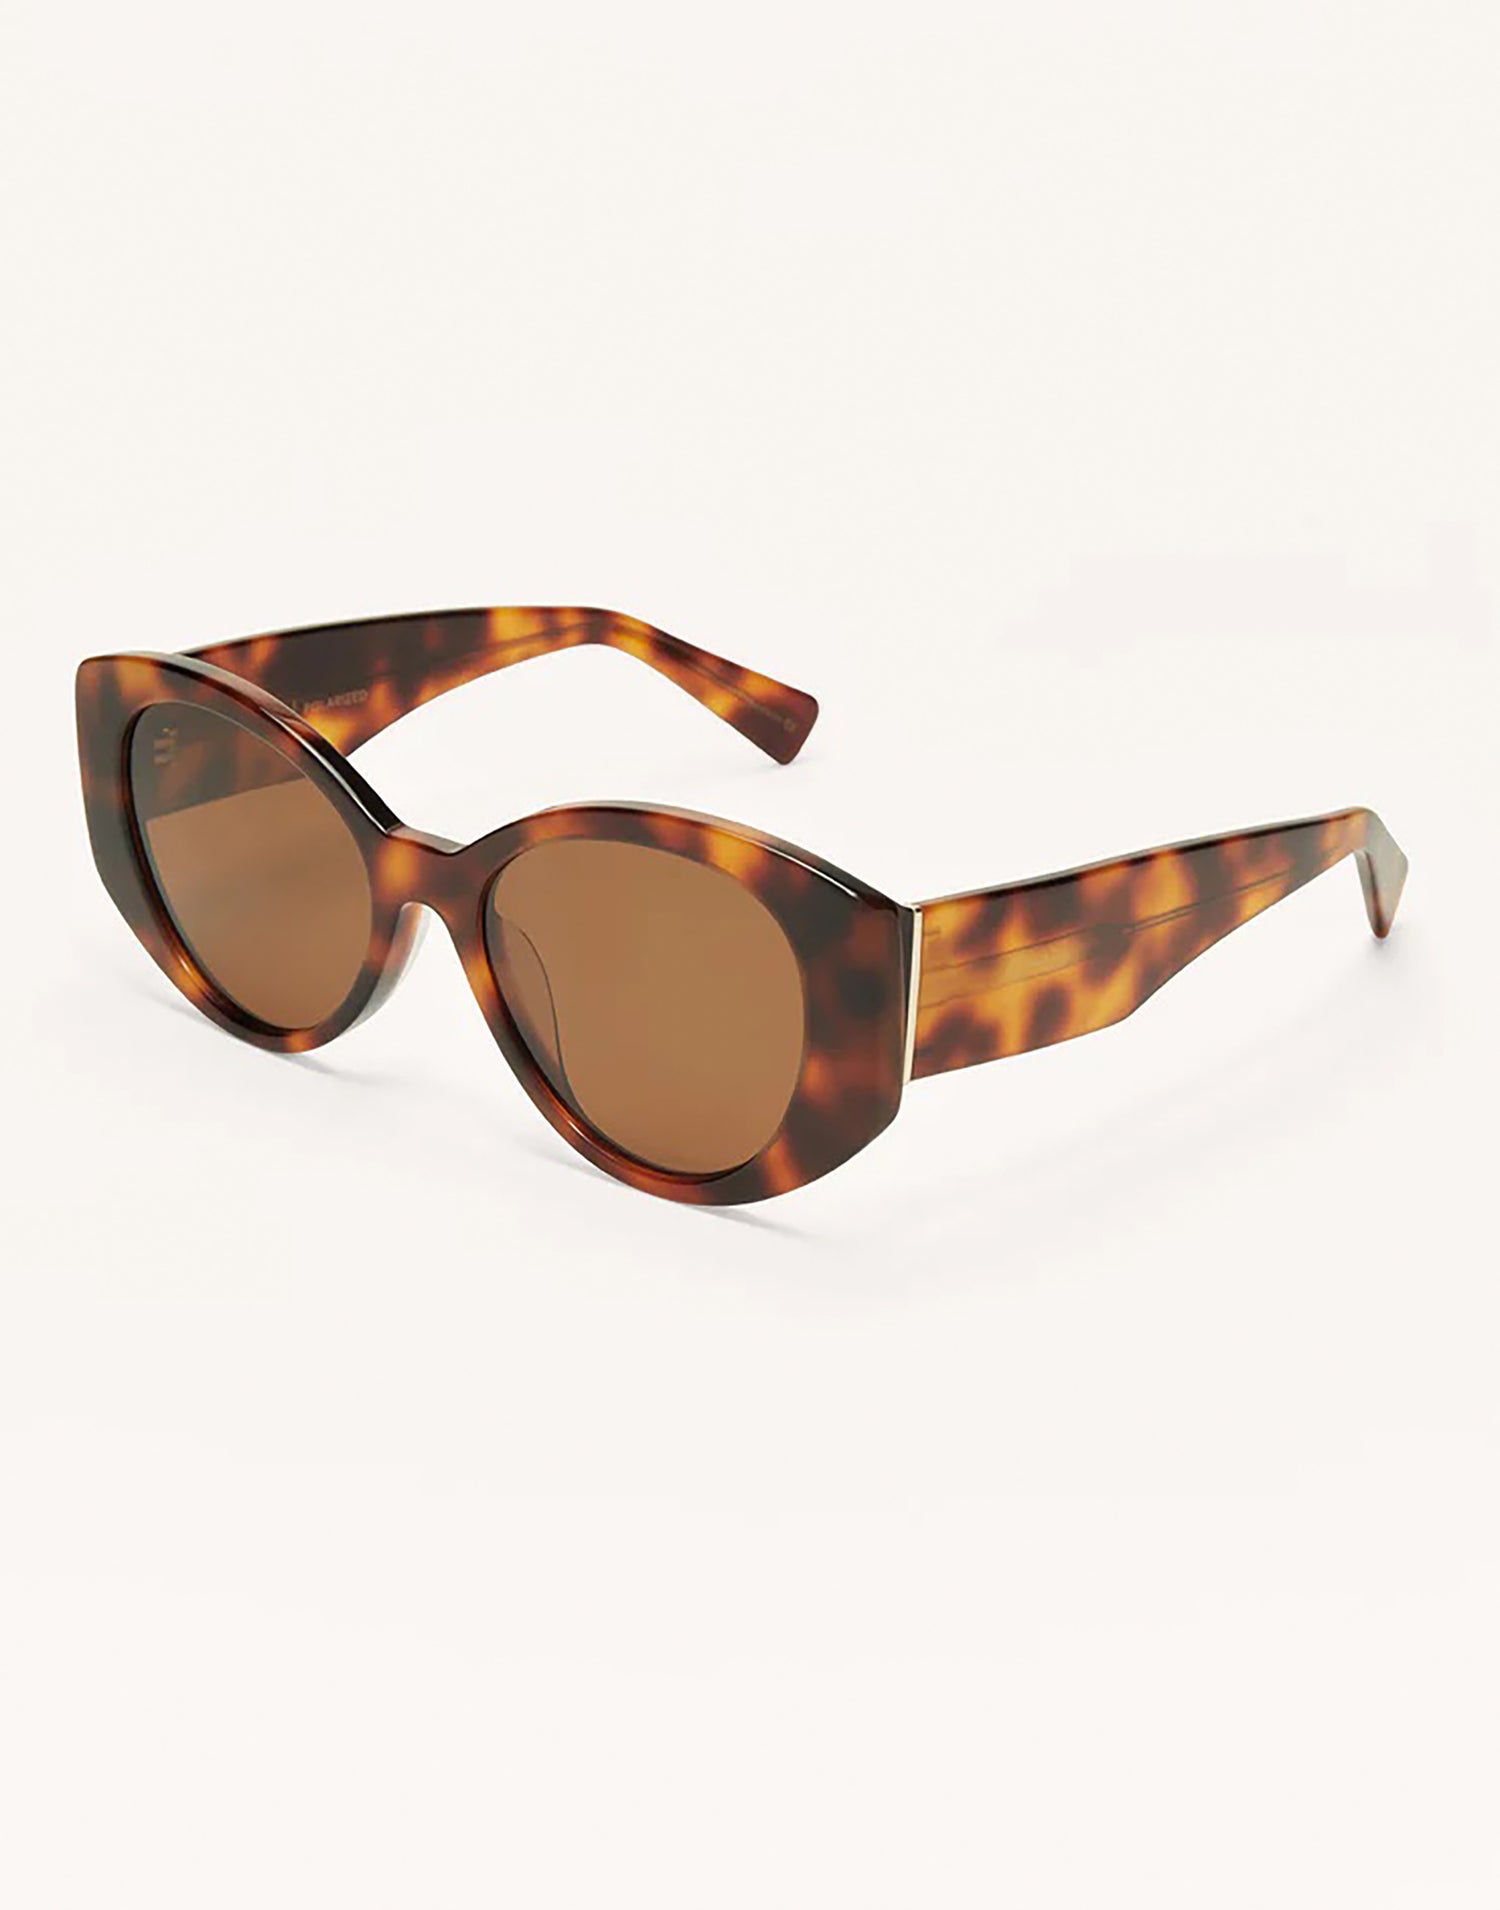 Daydream Sunglasses by Z Supply in Brown Tortoise - Angled View